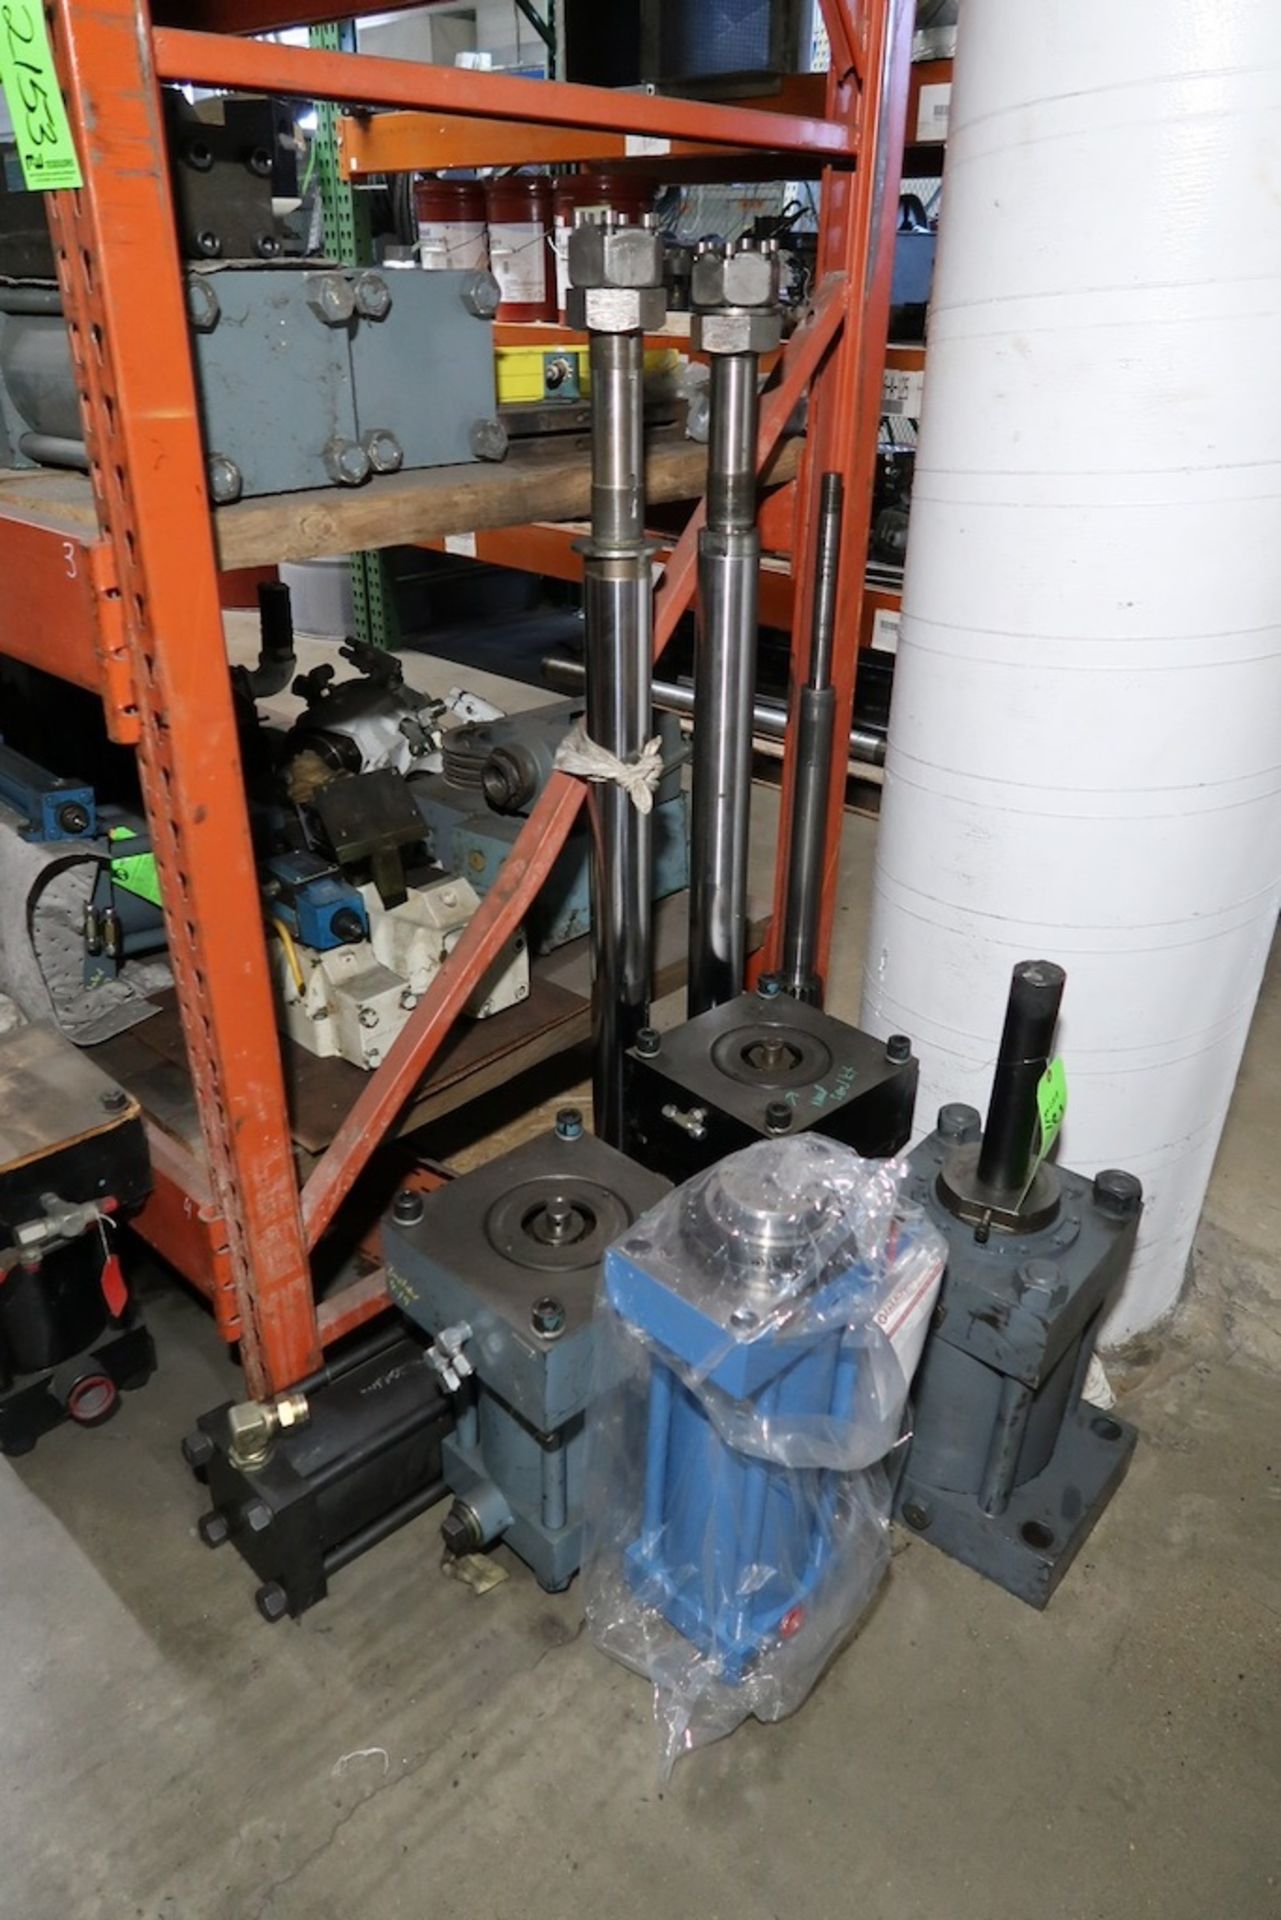 (1) Section of Pallet Racking with Assorted Spare Parts, Hydraulic Pumps, Heat Exchangers, Etc. - Image 11 of 18